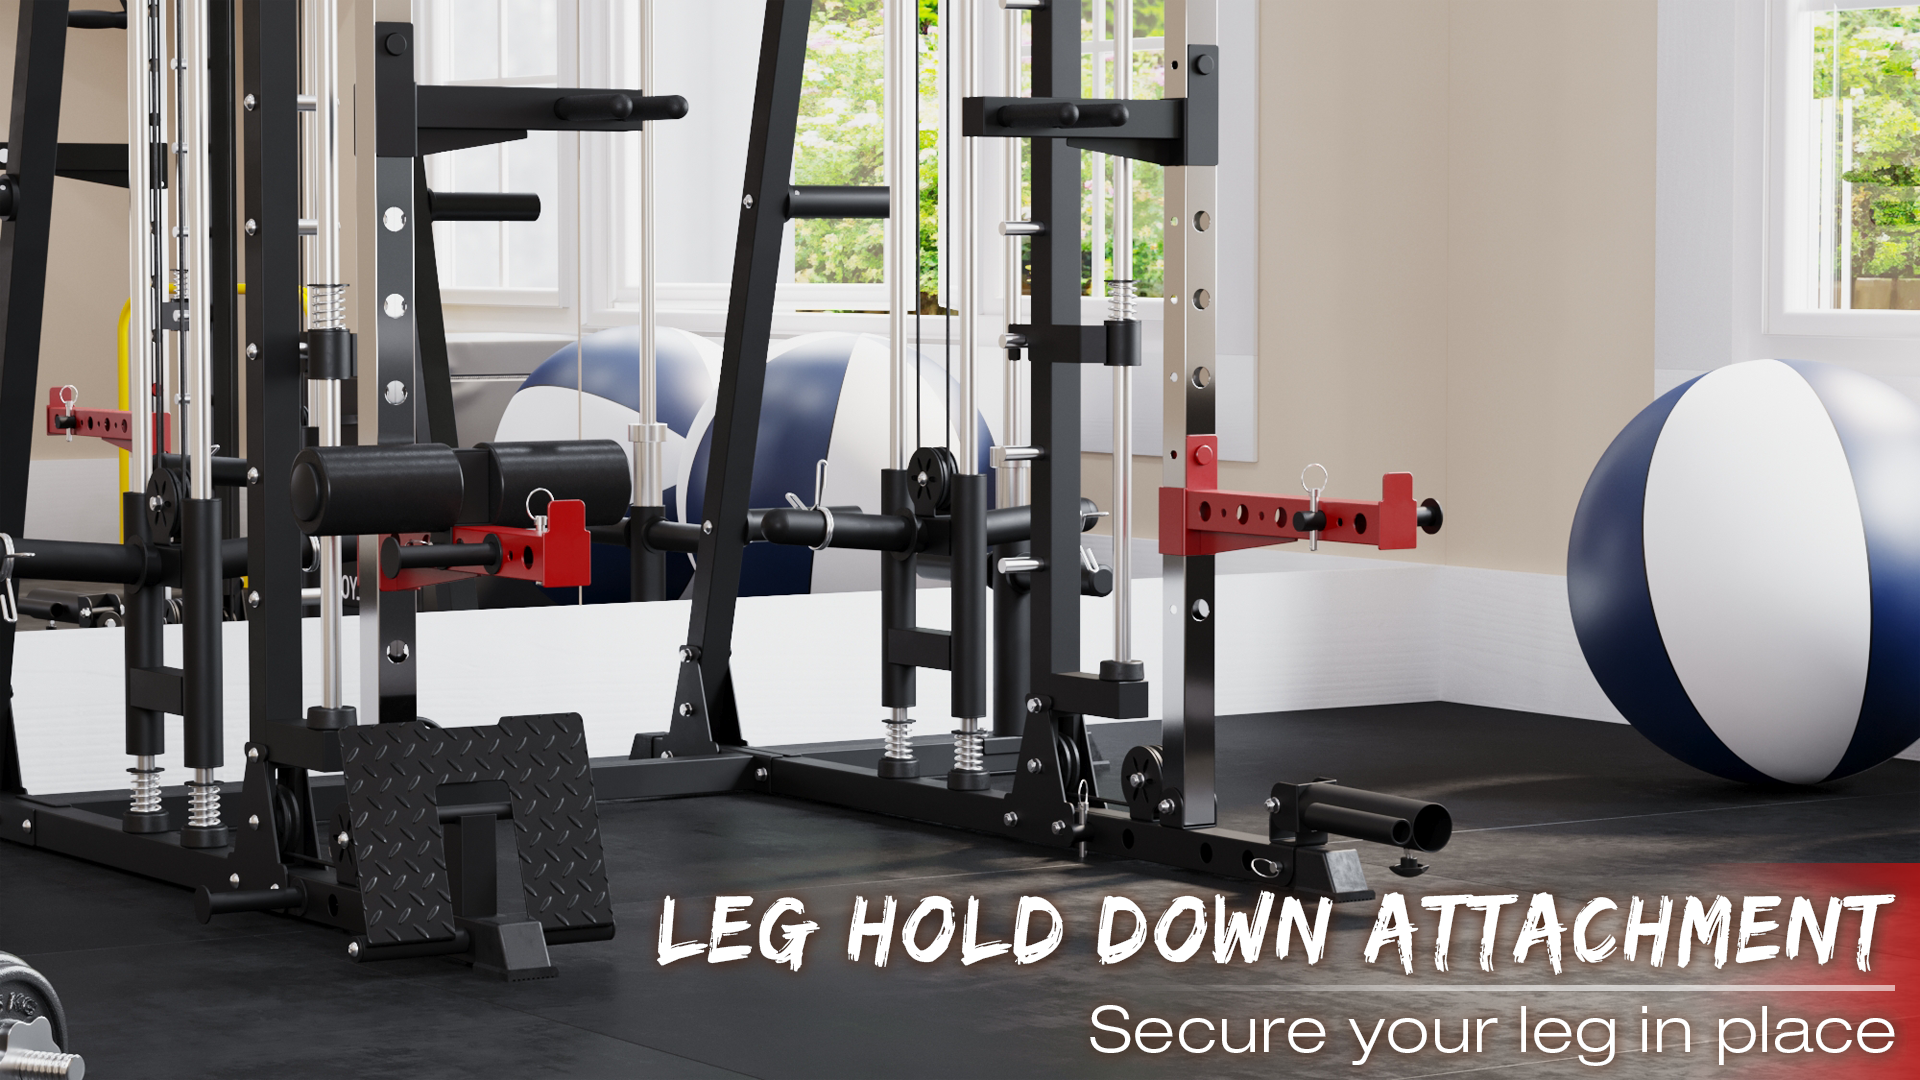 ALL ABOUT THE LEG HOLD DOWN ATTACHMENT